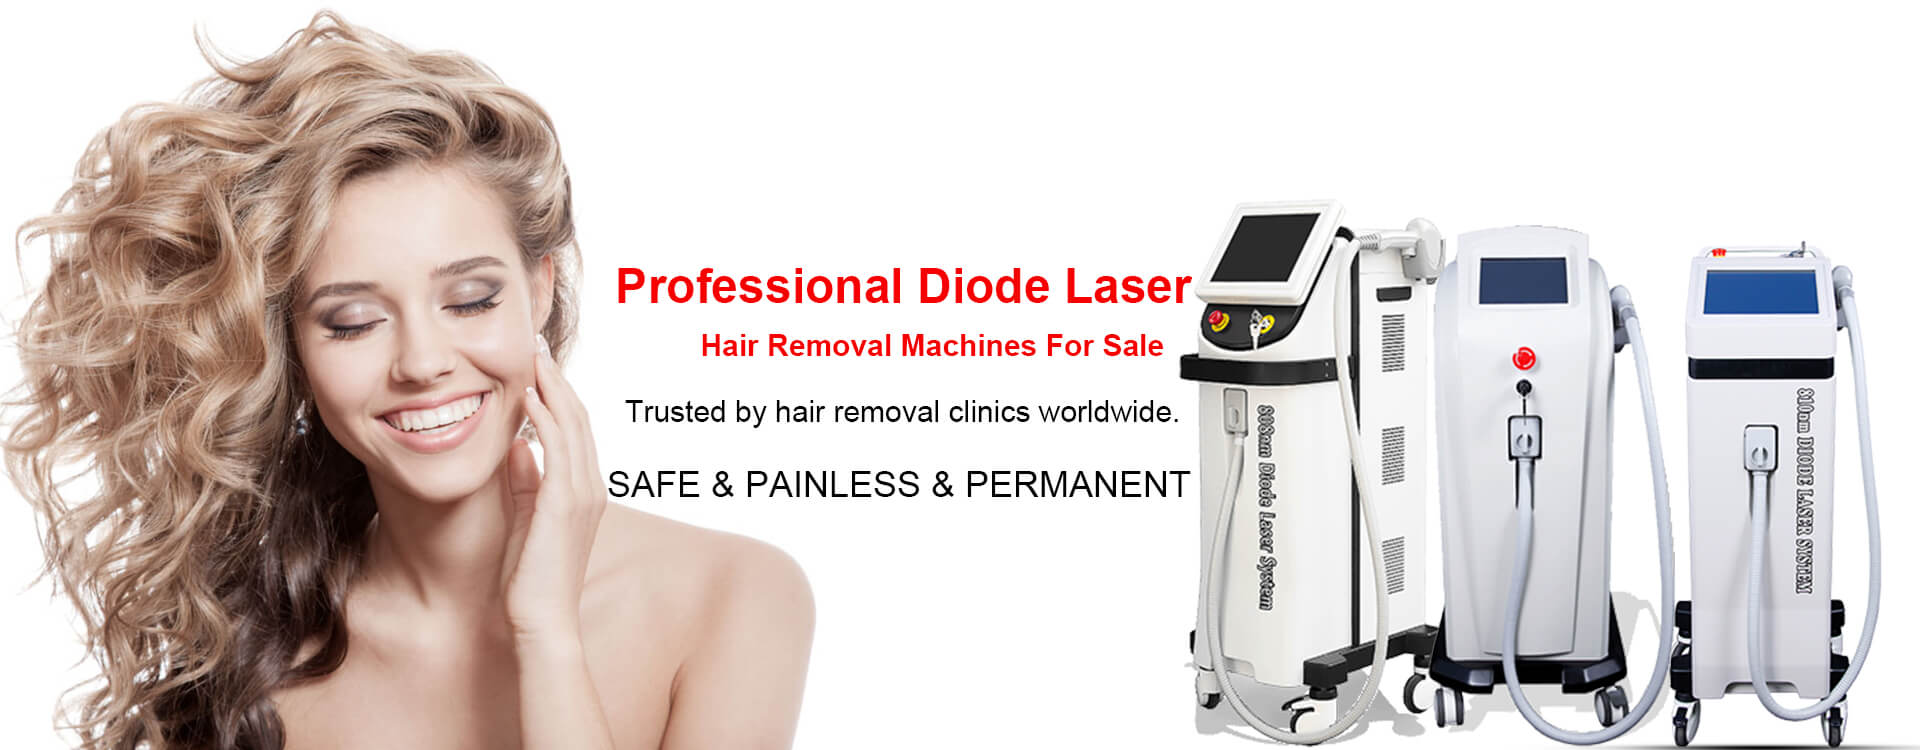 Professional Laser Hair Removal Machines For Sale